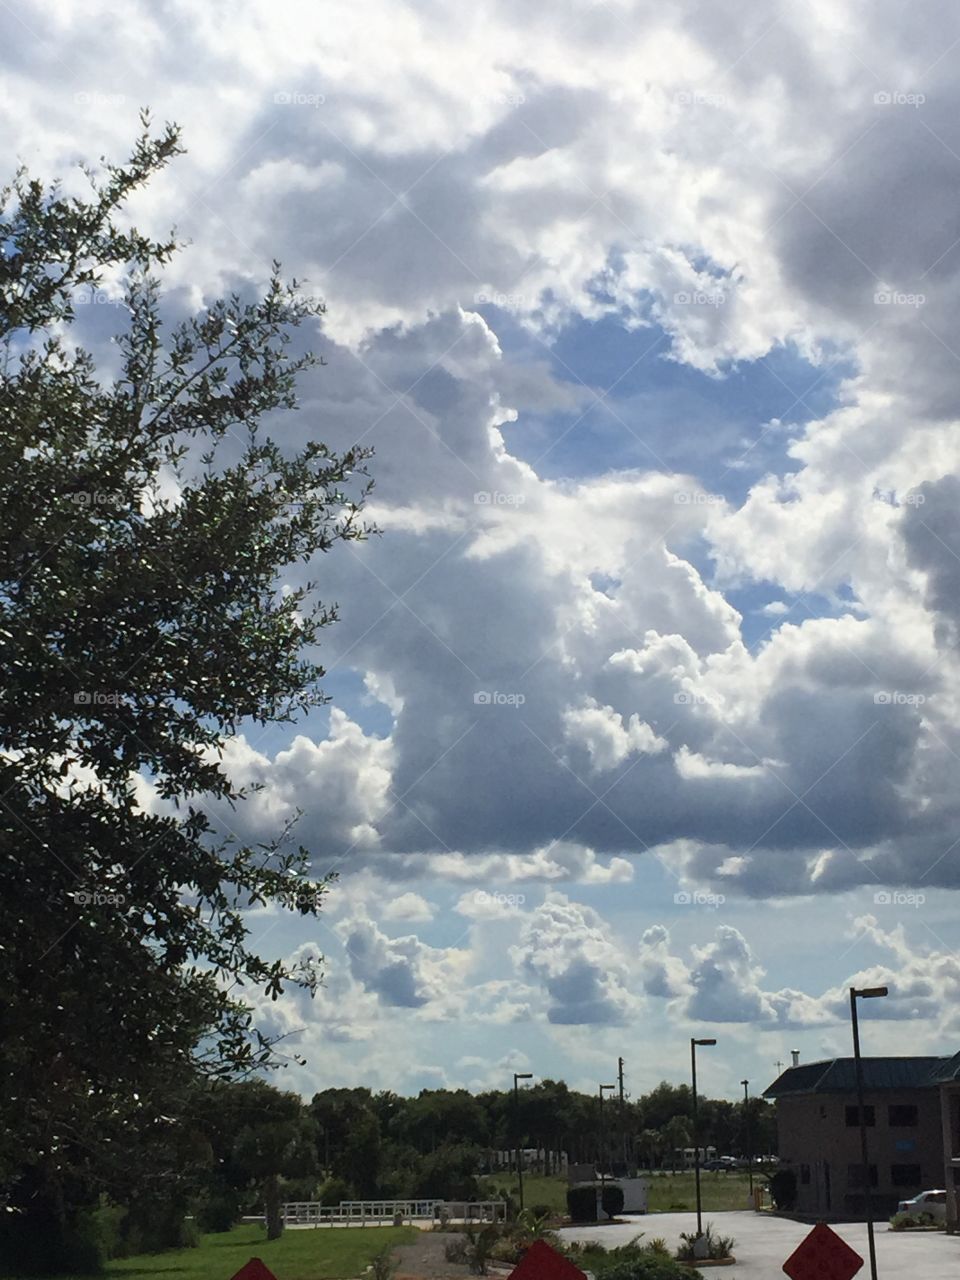 Cloud Illusions. The beautiful clouds and sky in Davenport, FL; August 2015